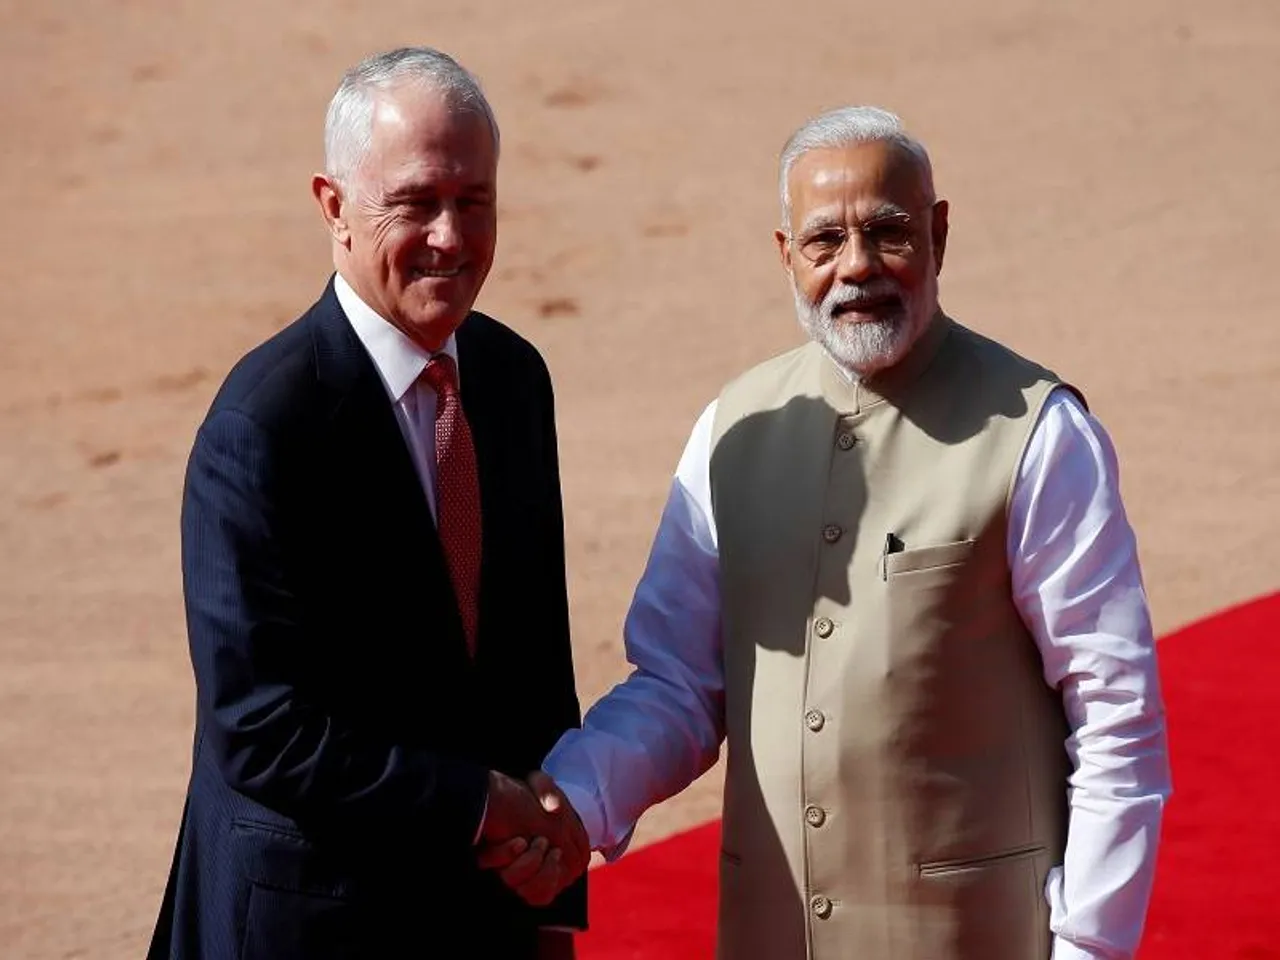 India concerns over Australian visa issue to Turnbull